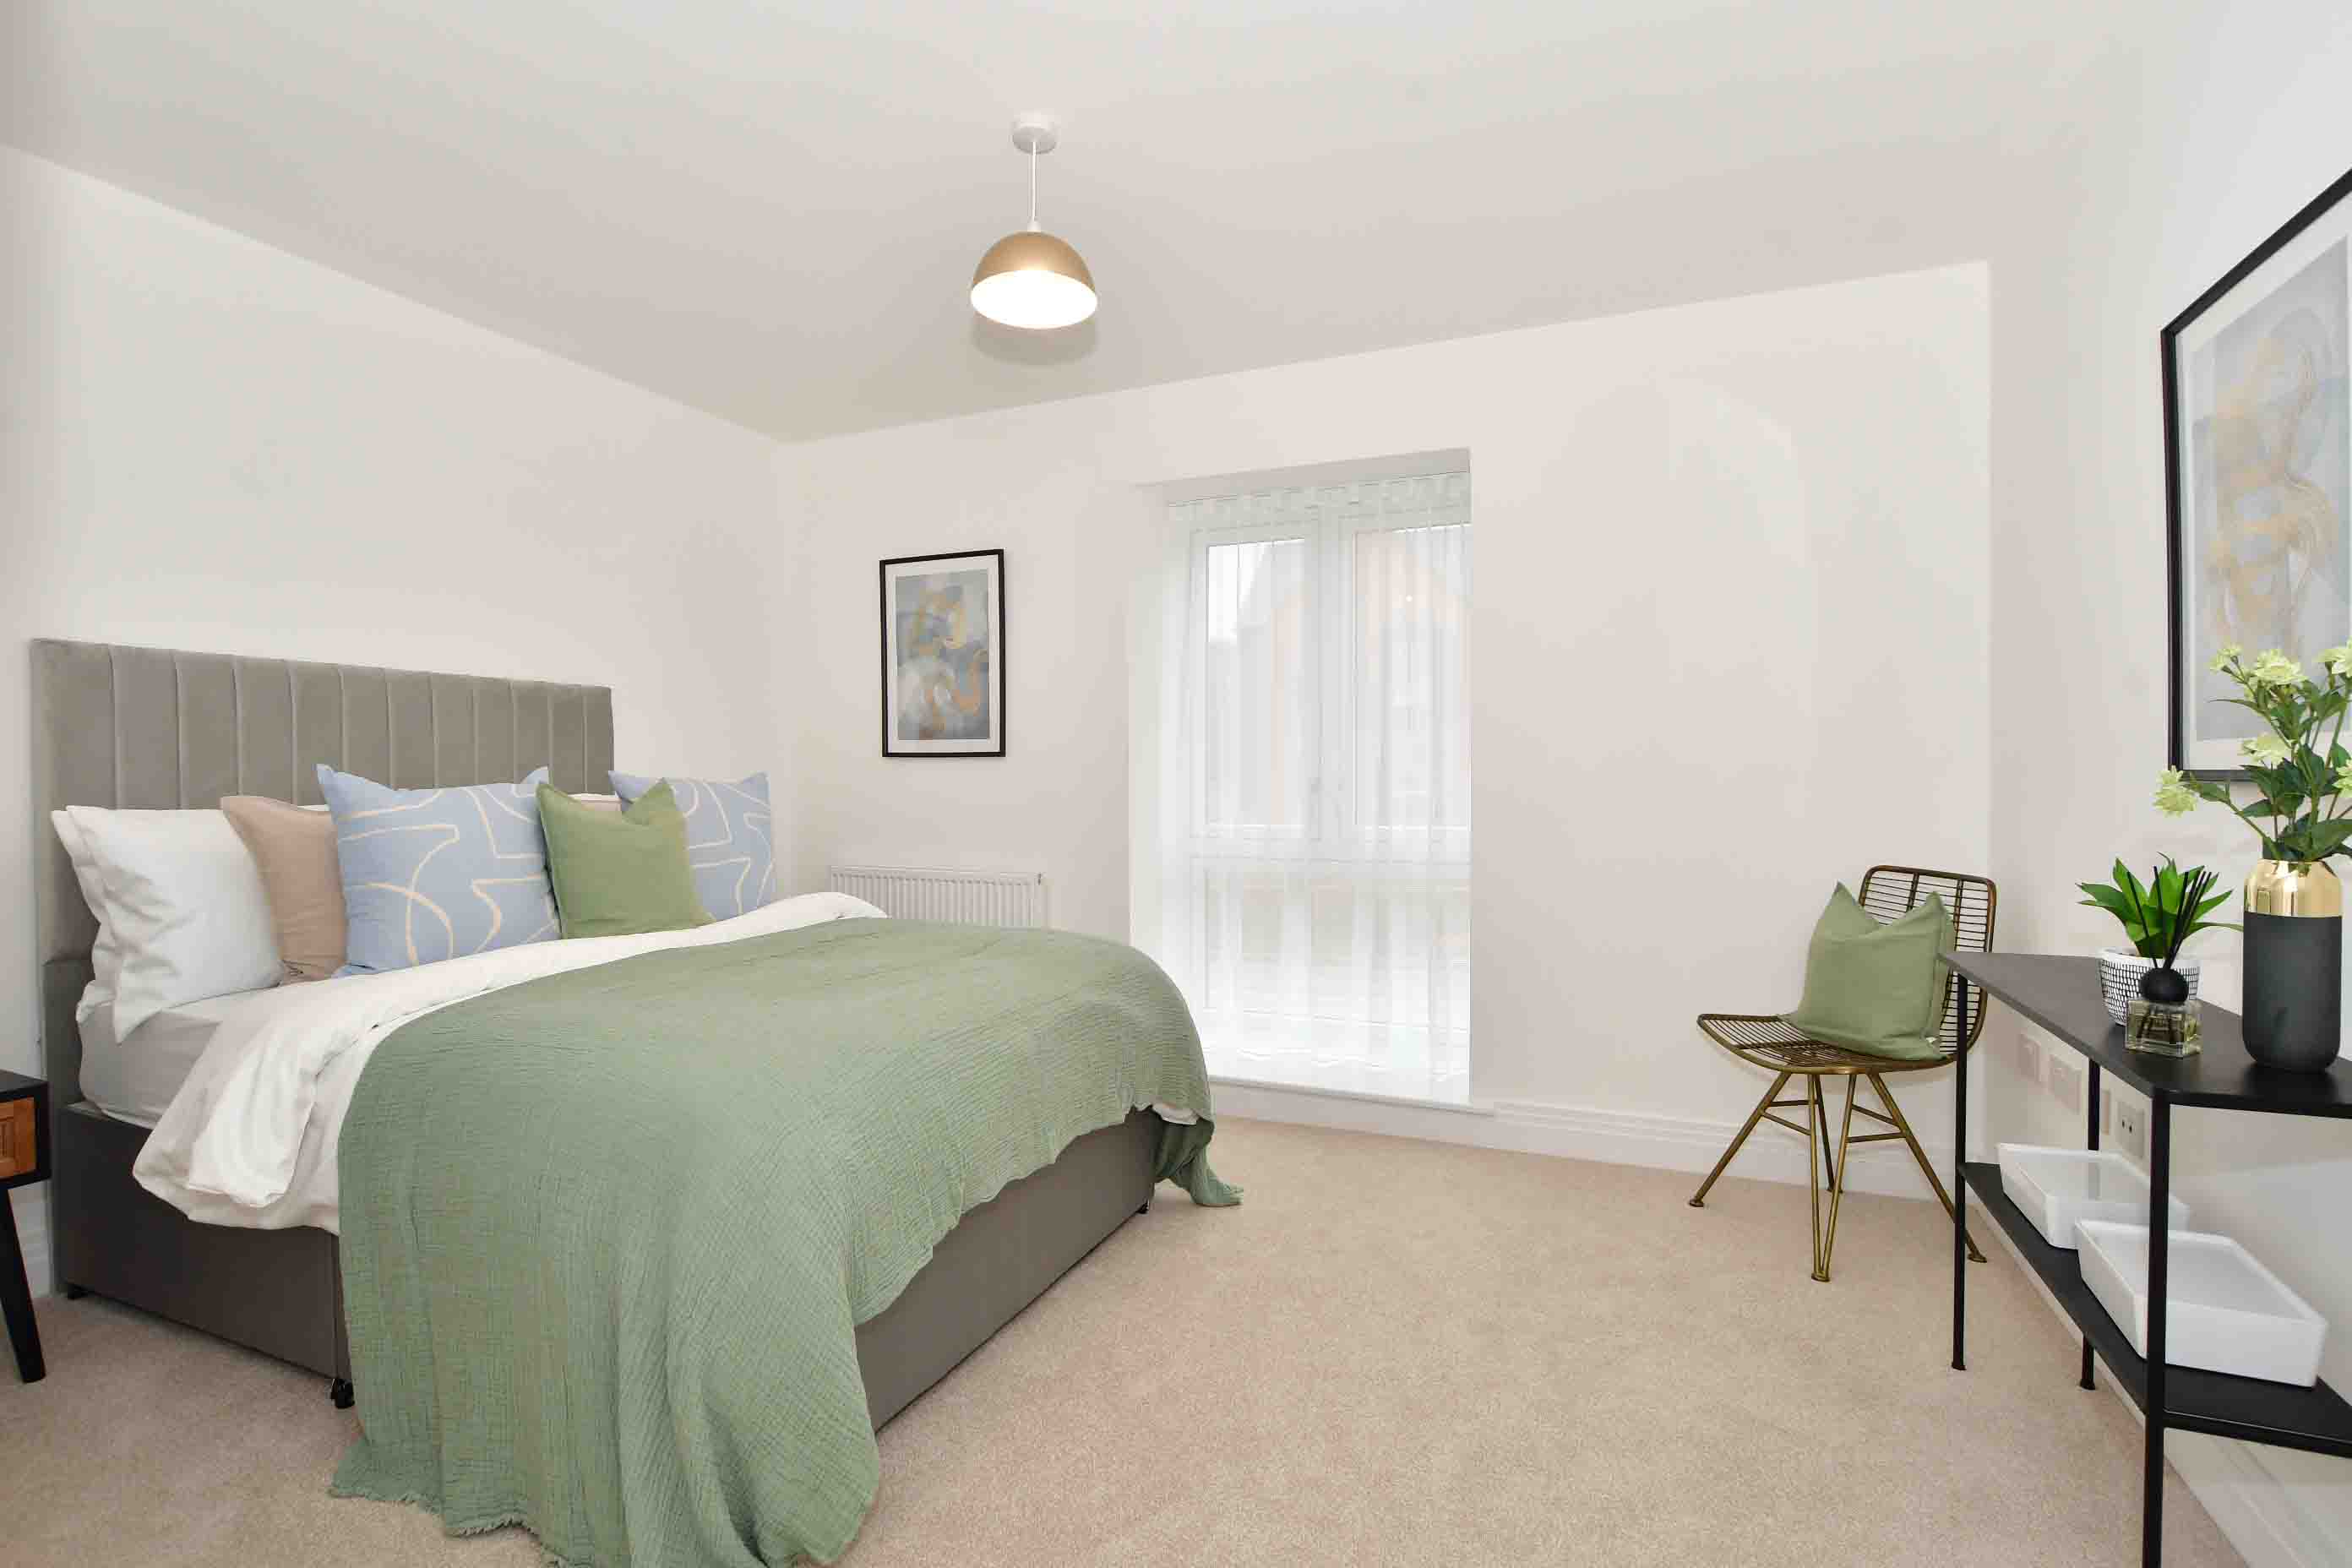 Bedroom at Kings Barton shared ownership apartment in Winchester